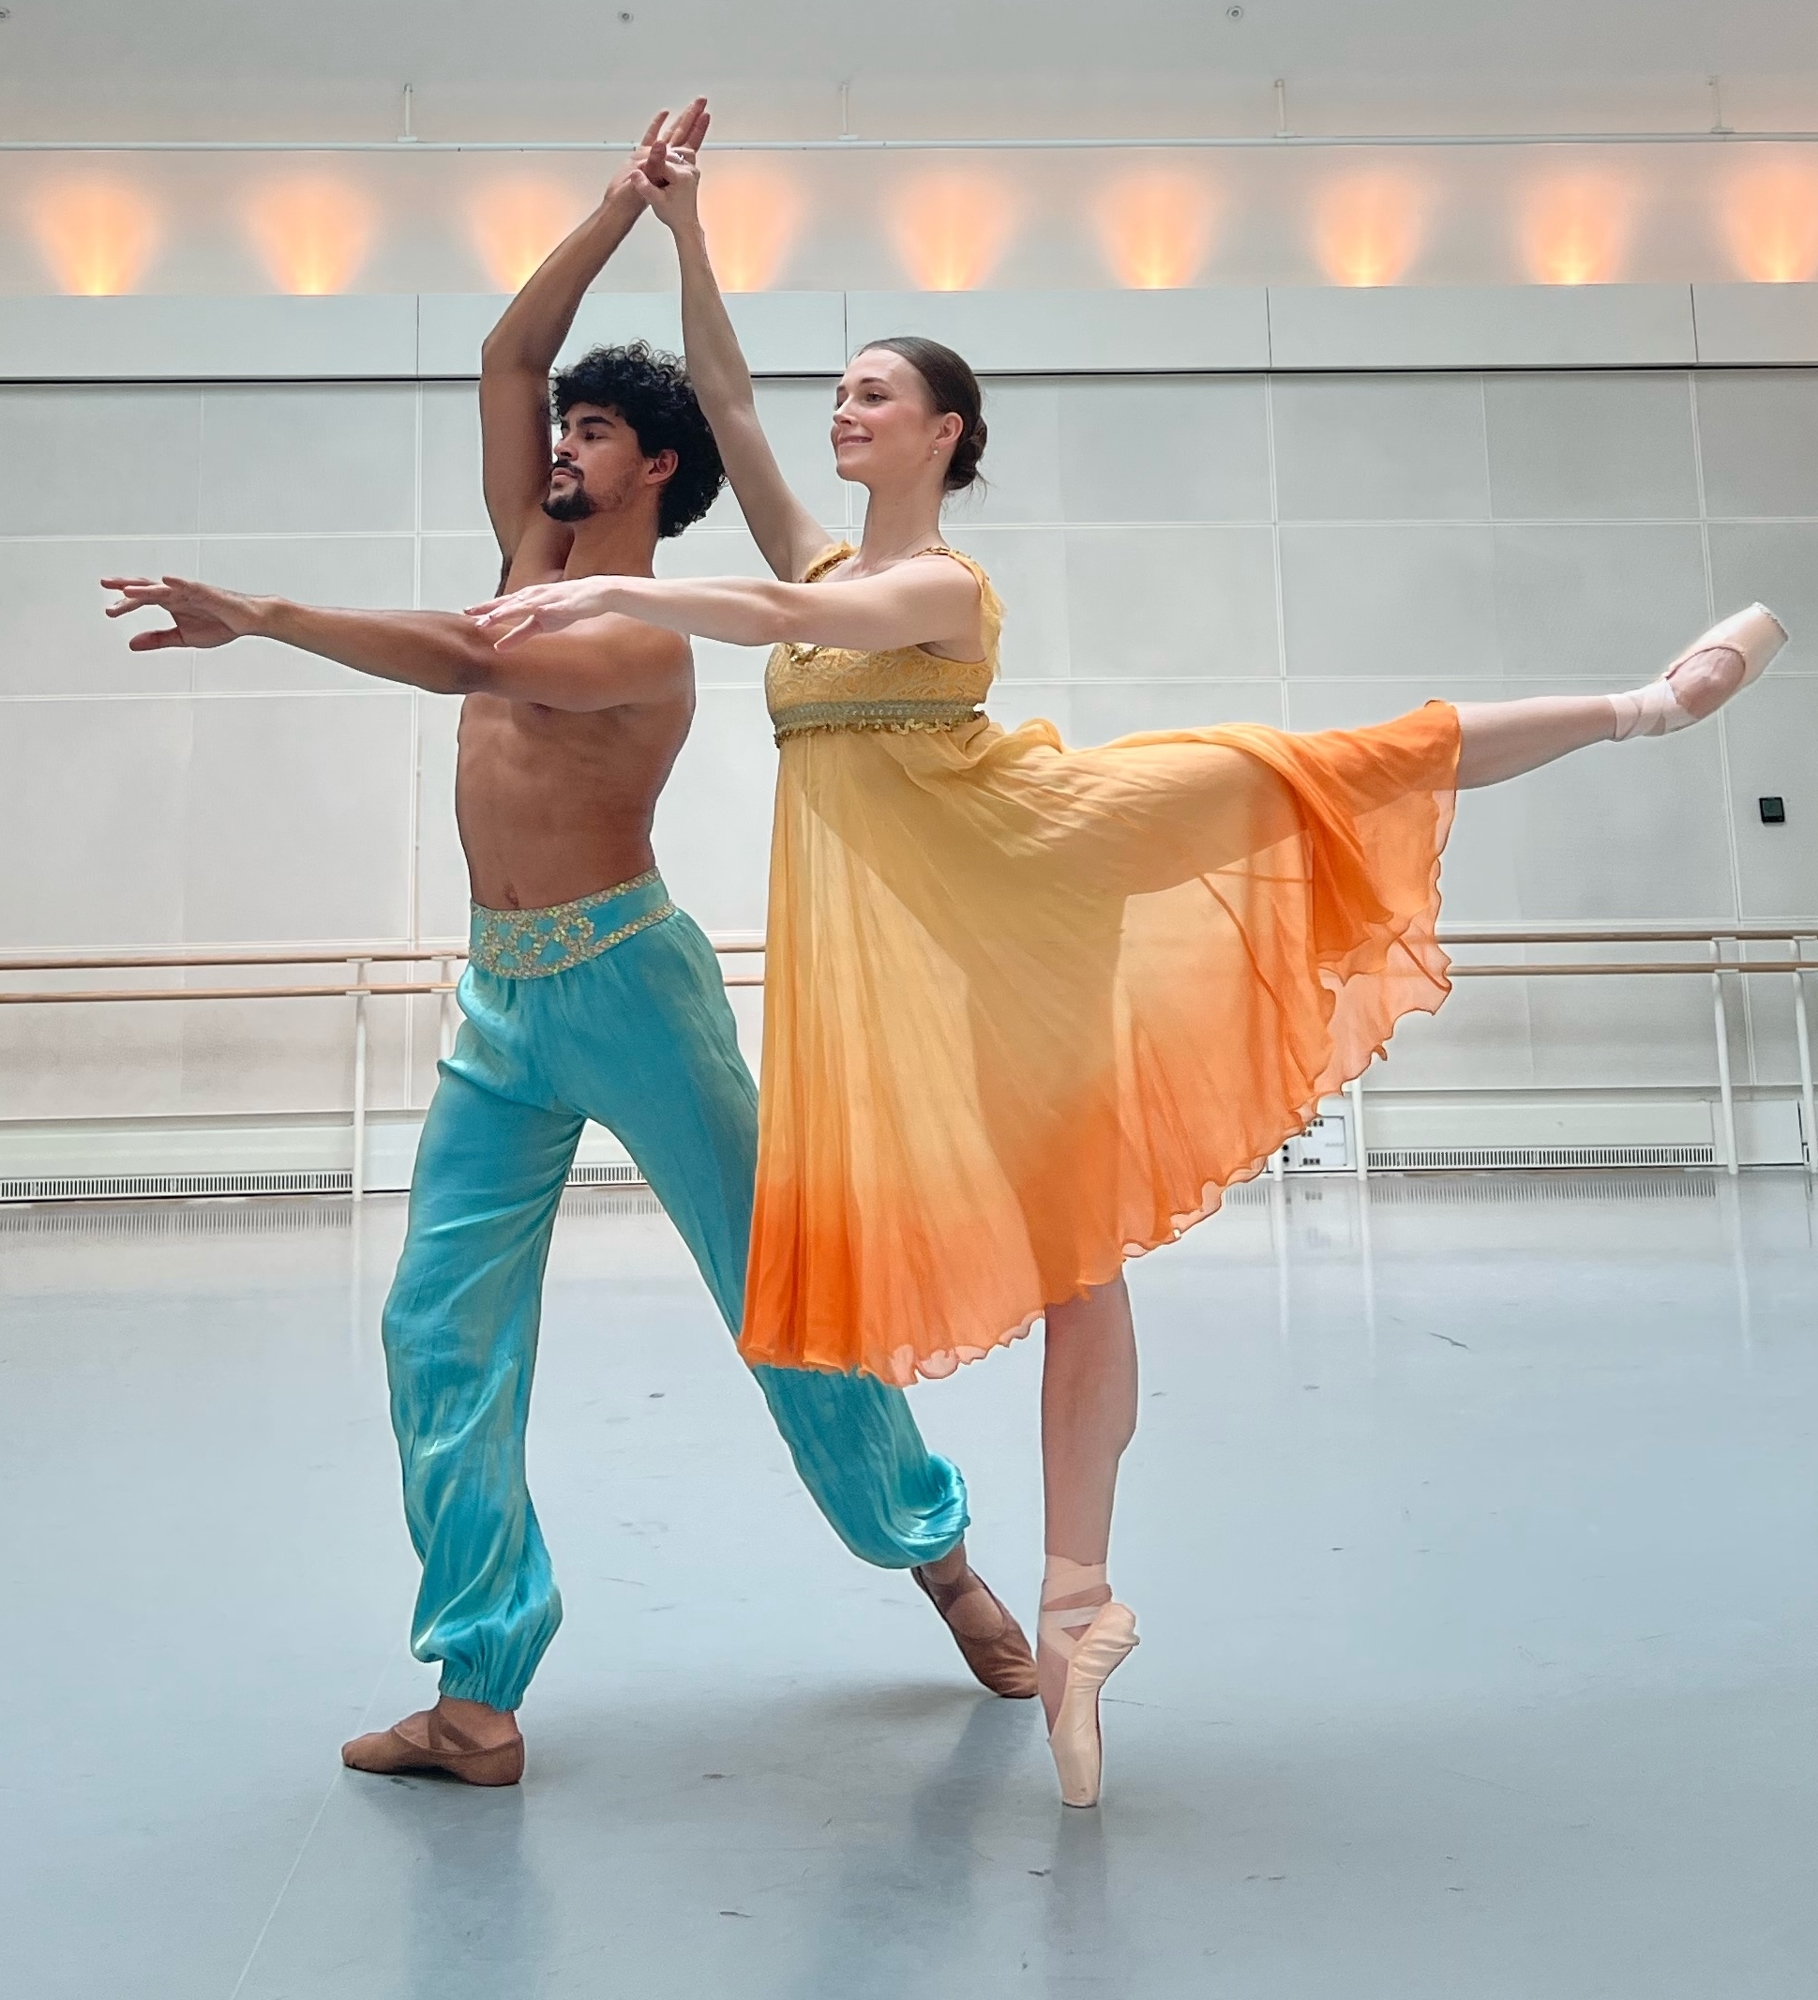 Francisco Serrano and Charlotte Tonkinson of The Royal Ballet will join the Sarasota Cuban Ballet School for a performance on July 30. (Courtesy photo)